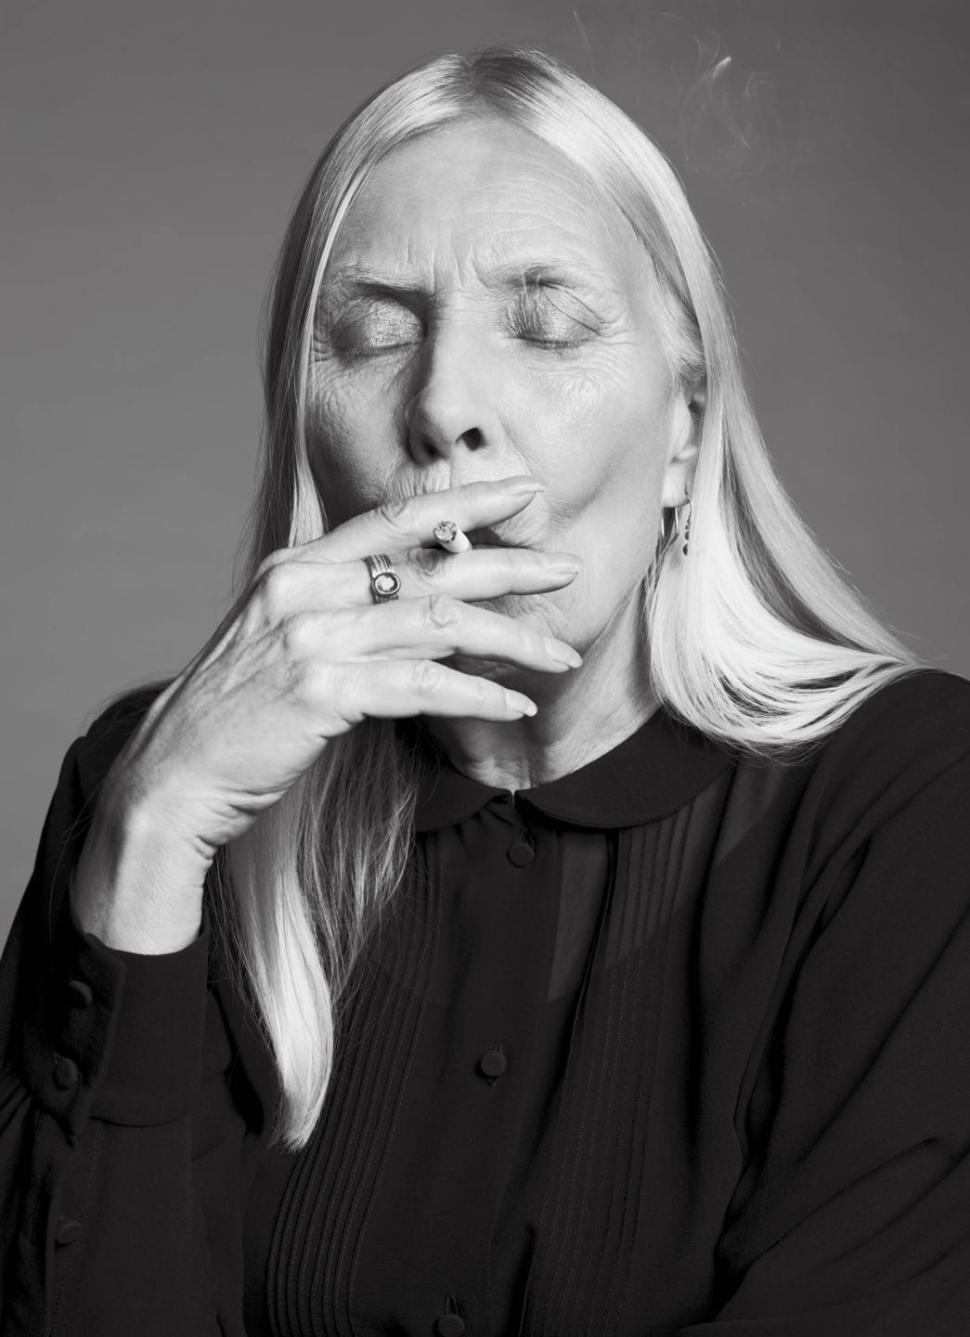 Life's no drag for Joni Mitchell, who appears in new V magazine. 